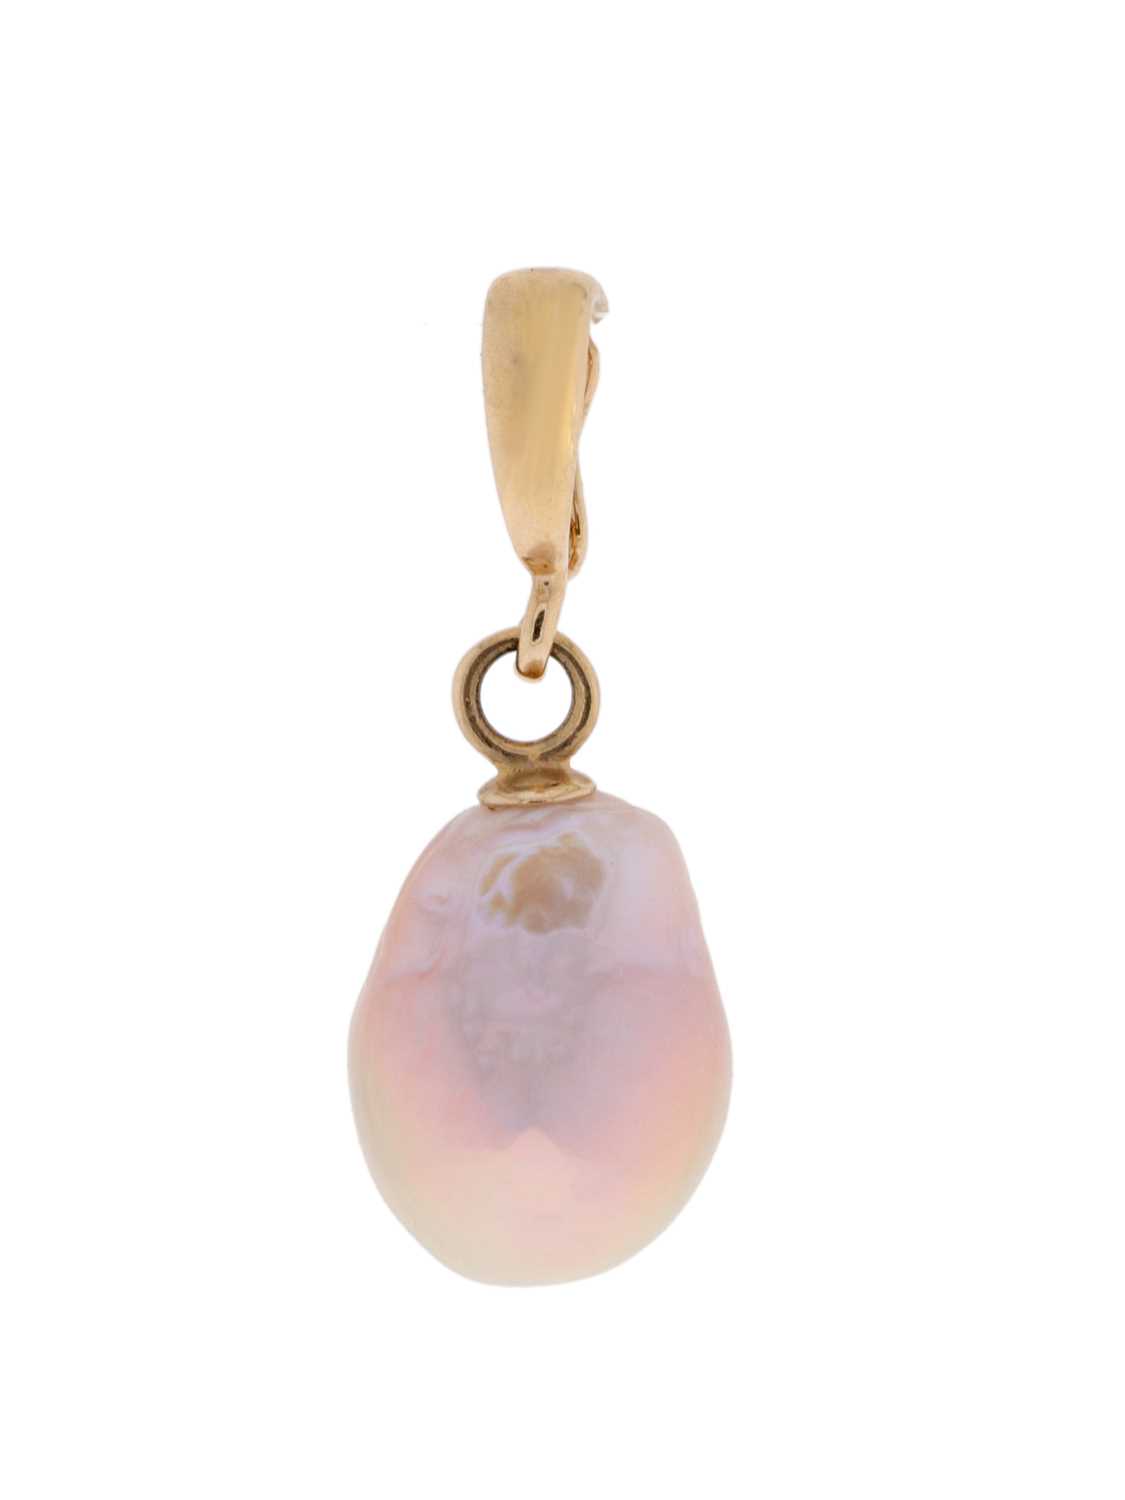 Lot 745 - Gold Pendant with Cultured Solitaire Pearl